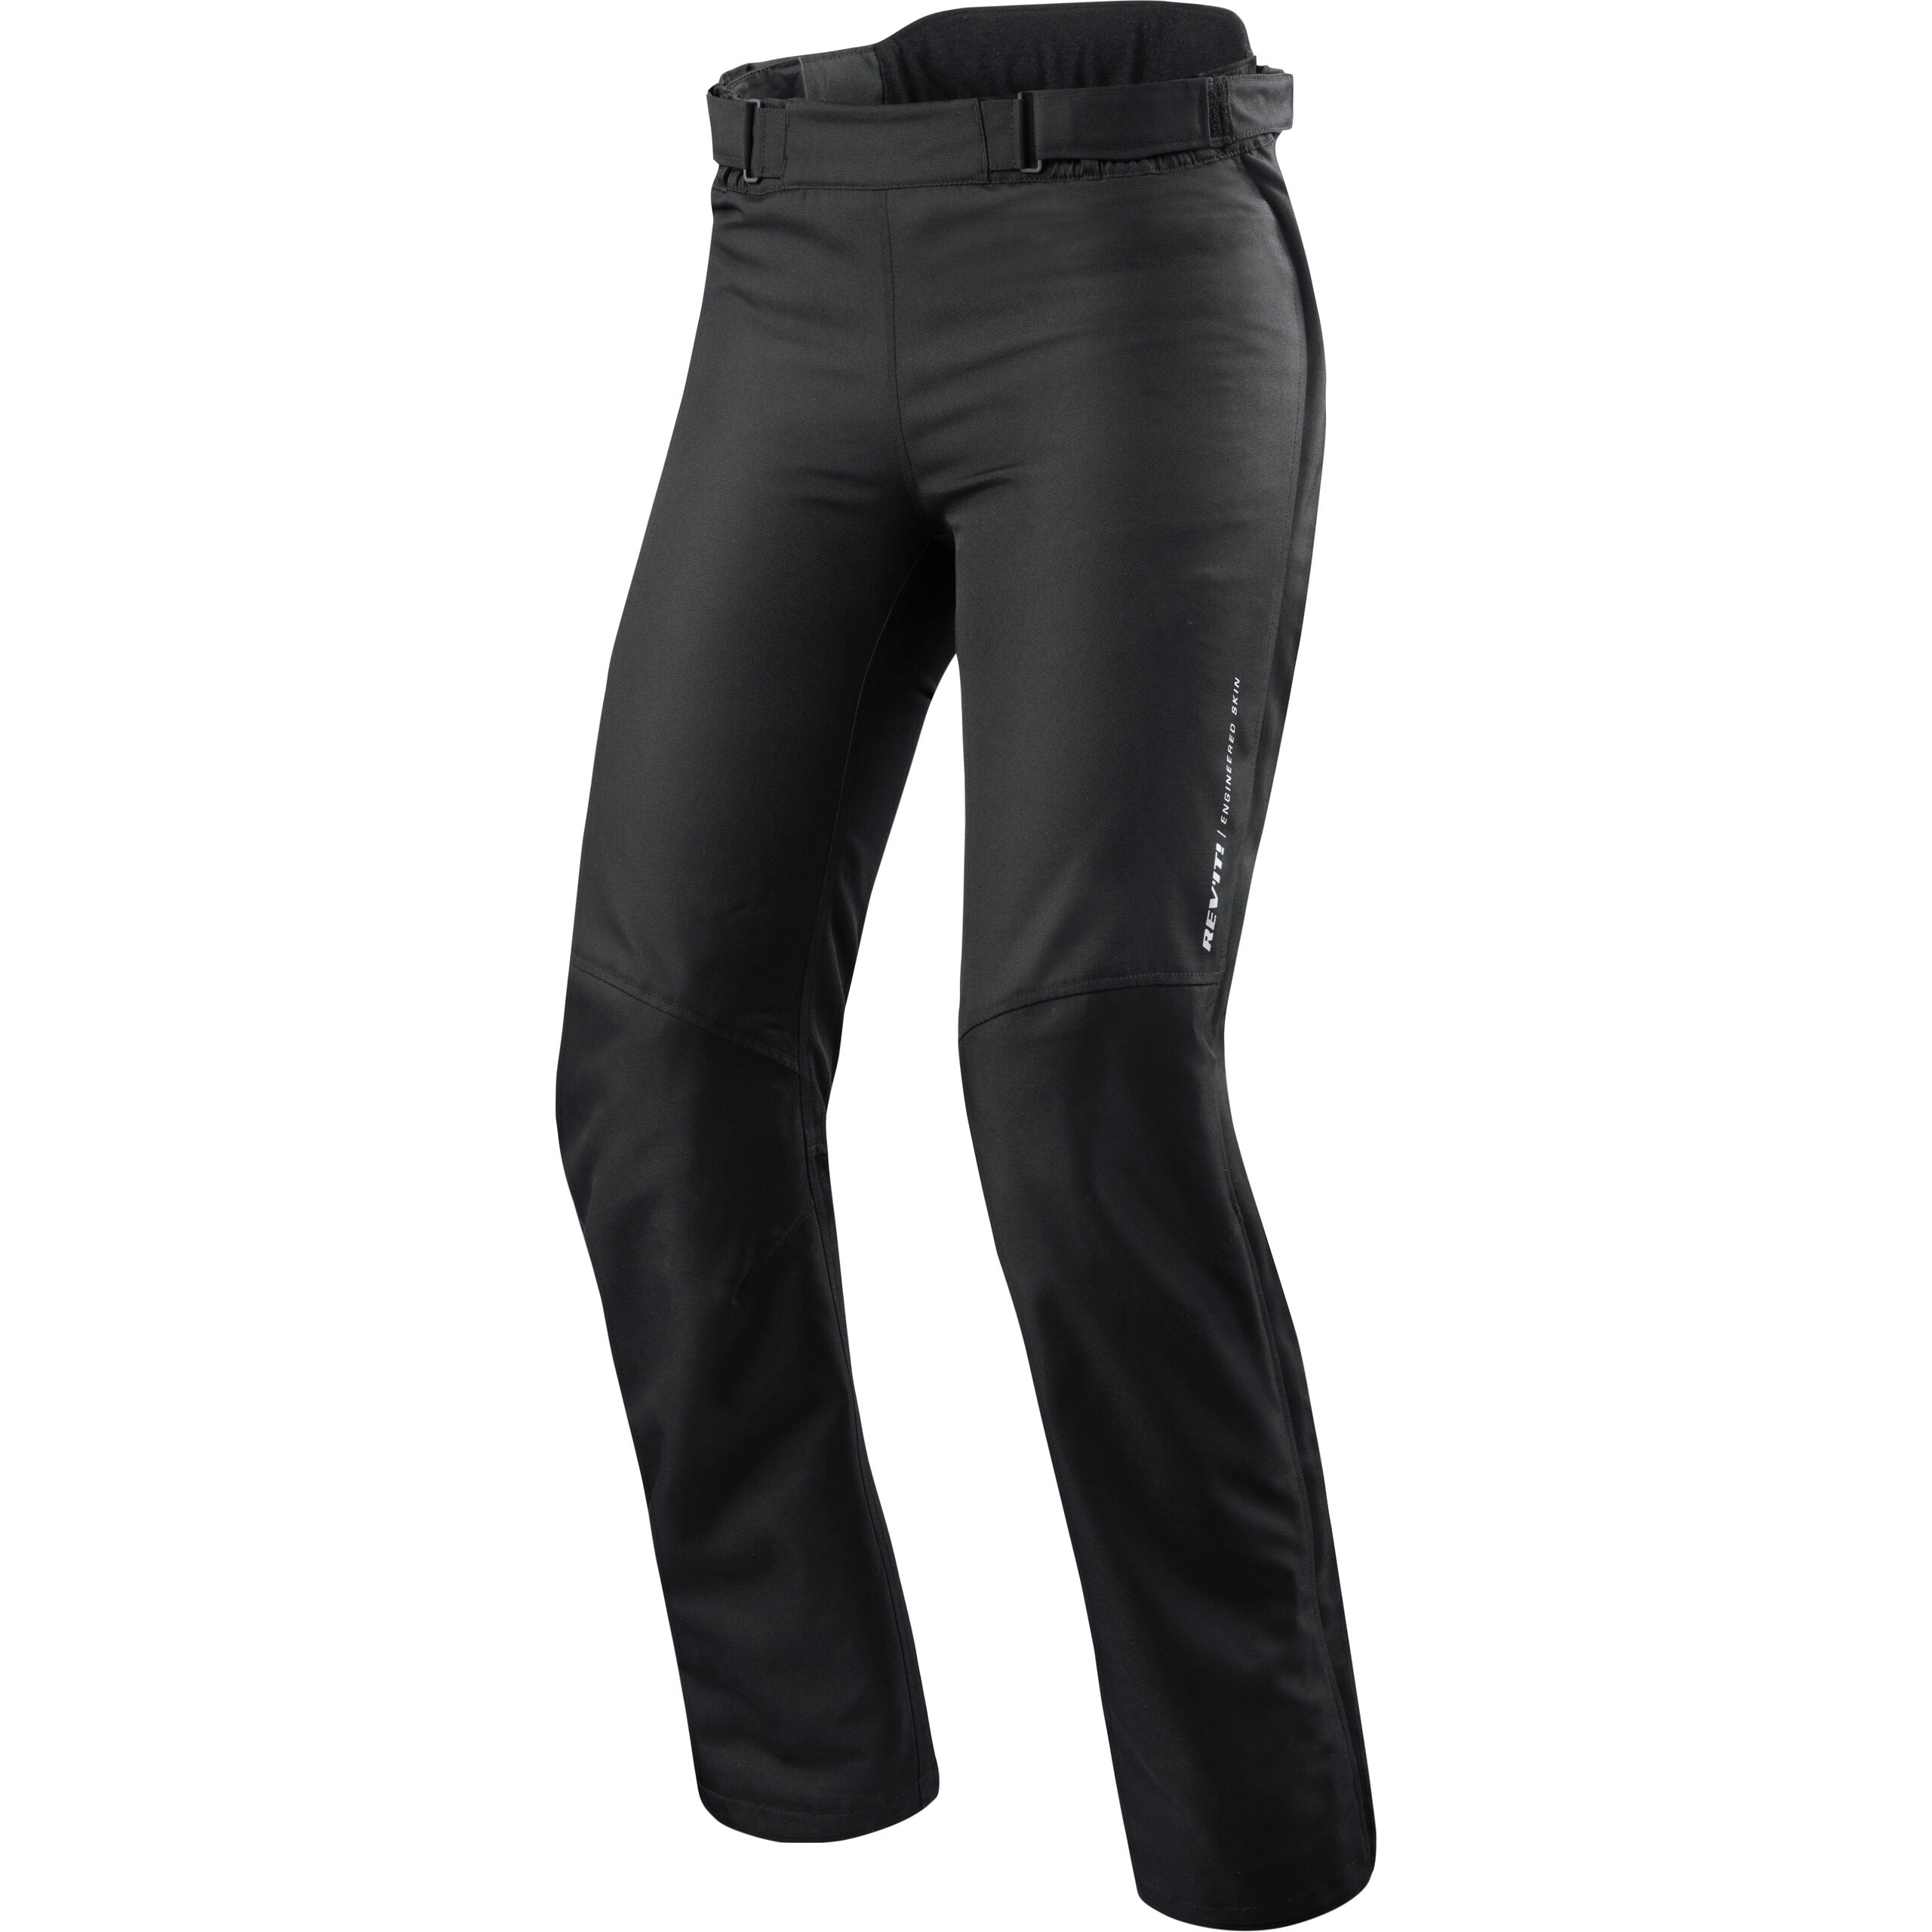 Revit Cargo SF Riding Pants Review - Champion Helmets | Motorcycle Gear